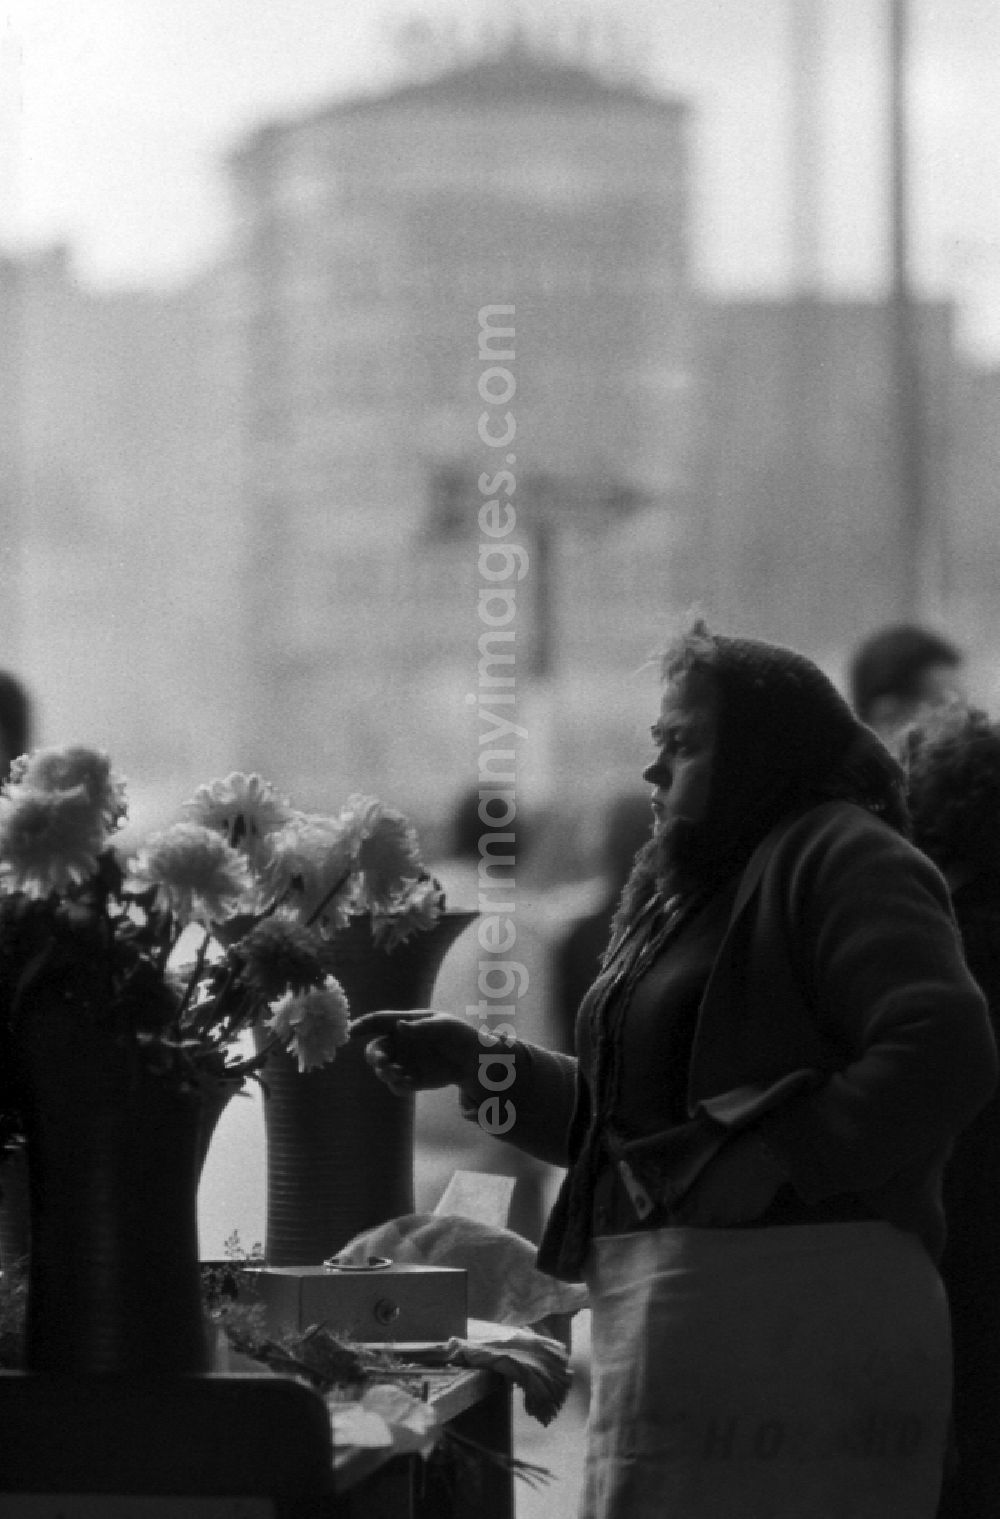 Berlin: An employee of the HO trade organization sells flowers in Berlin-Mitte in the area of the former GDR, German Democratic Republic